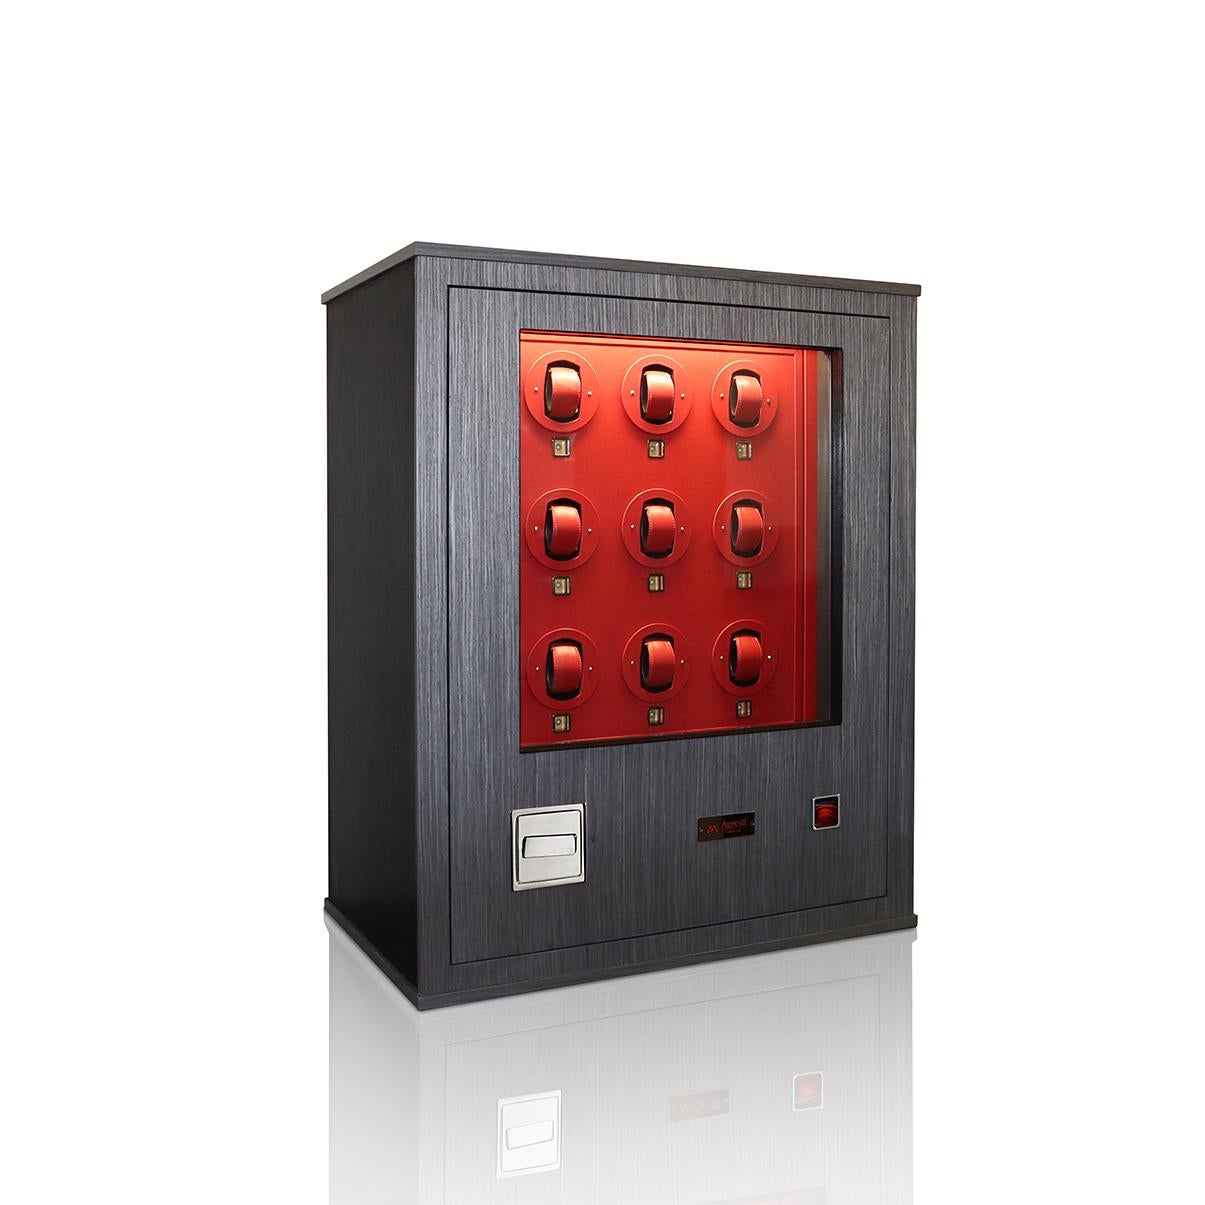 
IL FORZIERE DELLE ORE ROSSO

Armored chest in smoke grey oak and black leather with biometric opening and emergency key. Bulletproof and anti-theft glass, internal illumination. Nine Swiss-made winders for automatic watches. All winders are lined